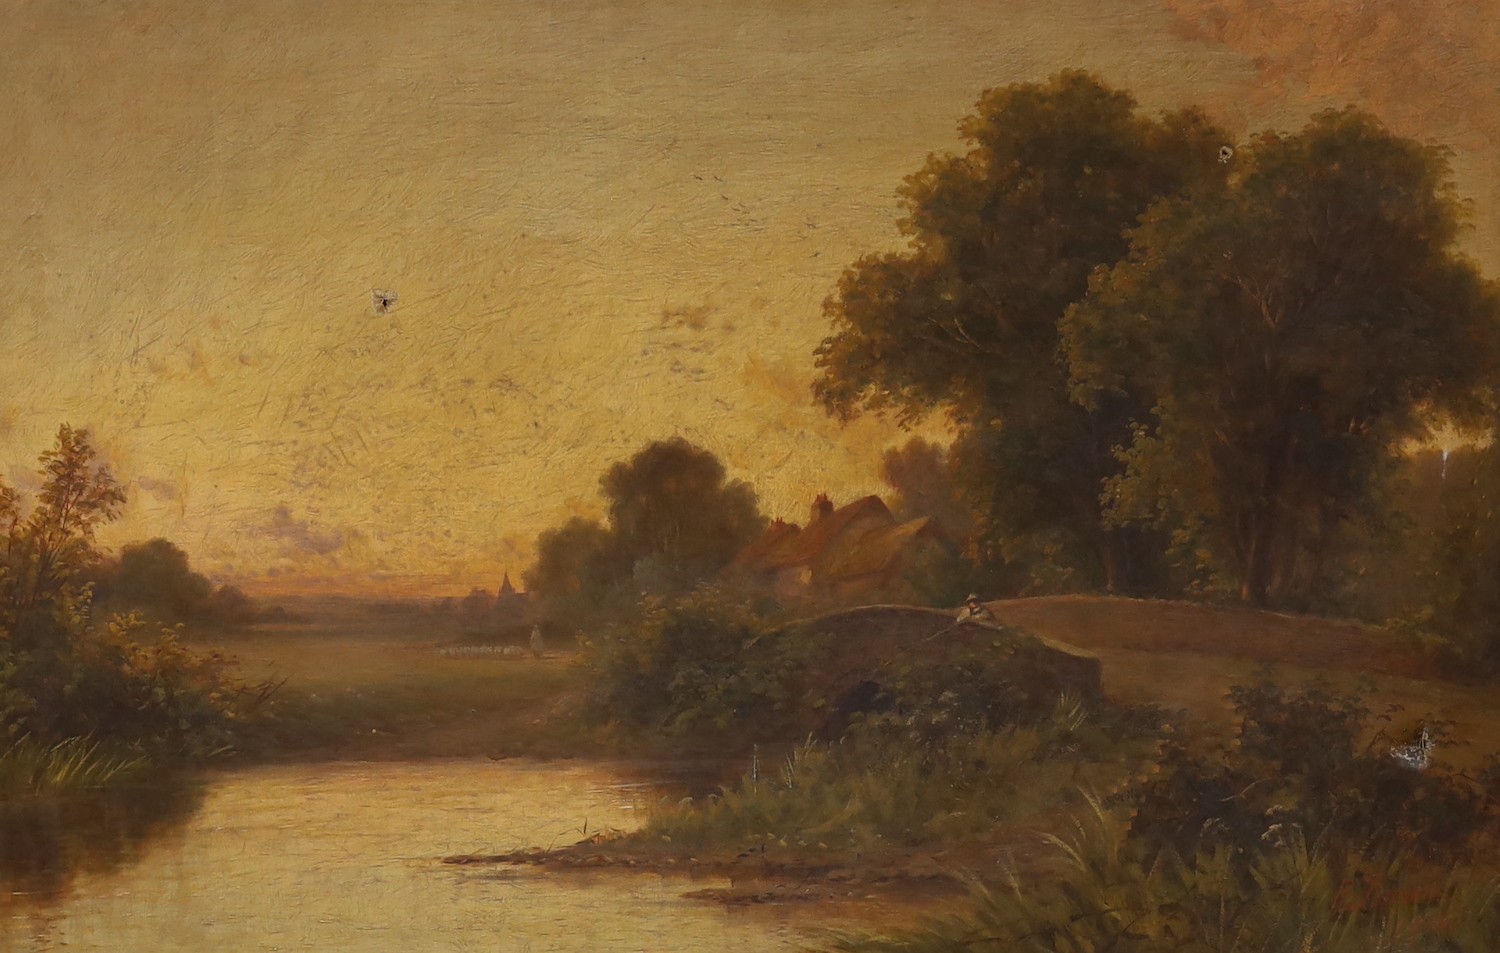 Robert Robin Fenson (1889-1914), oil on canvas, Landscape at sunset, signed and dated 1906, 50 x 75cm